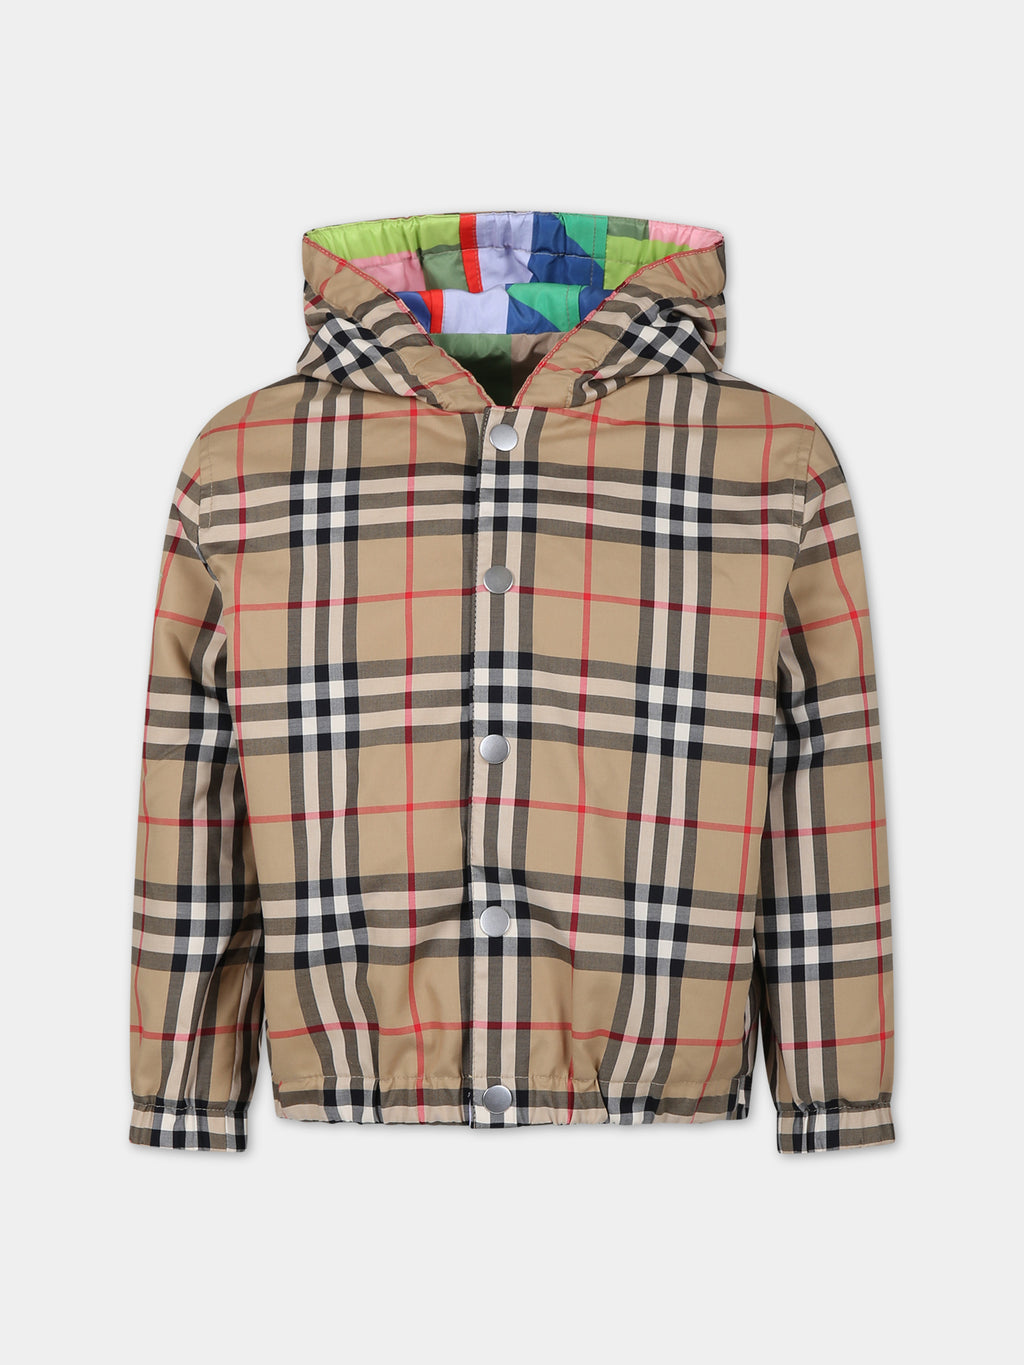 Beige jacket for boy with iconic vintage check